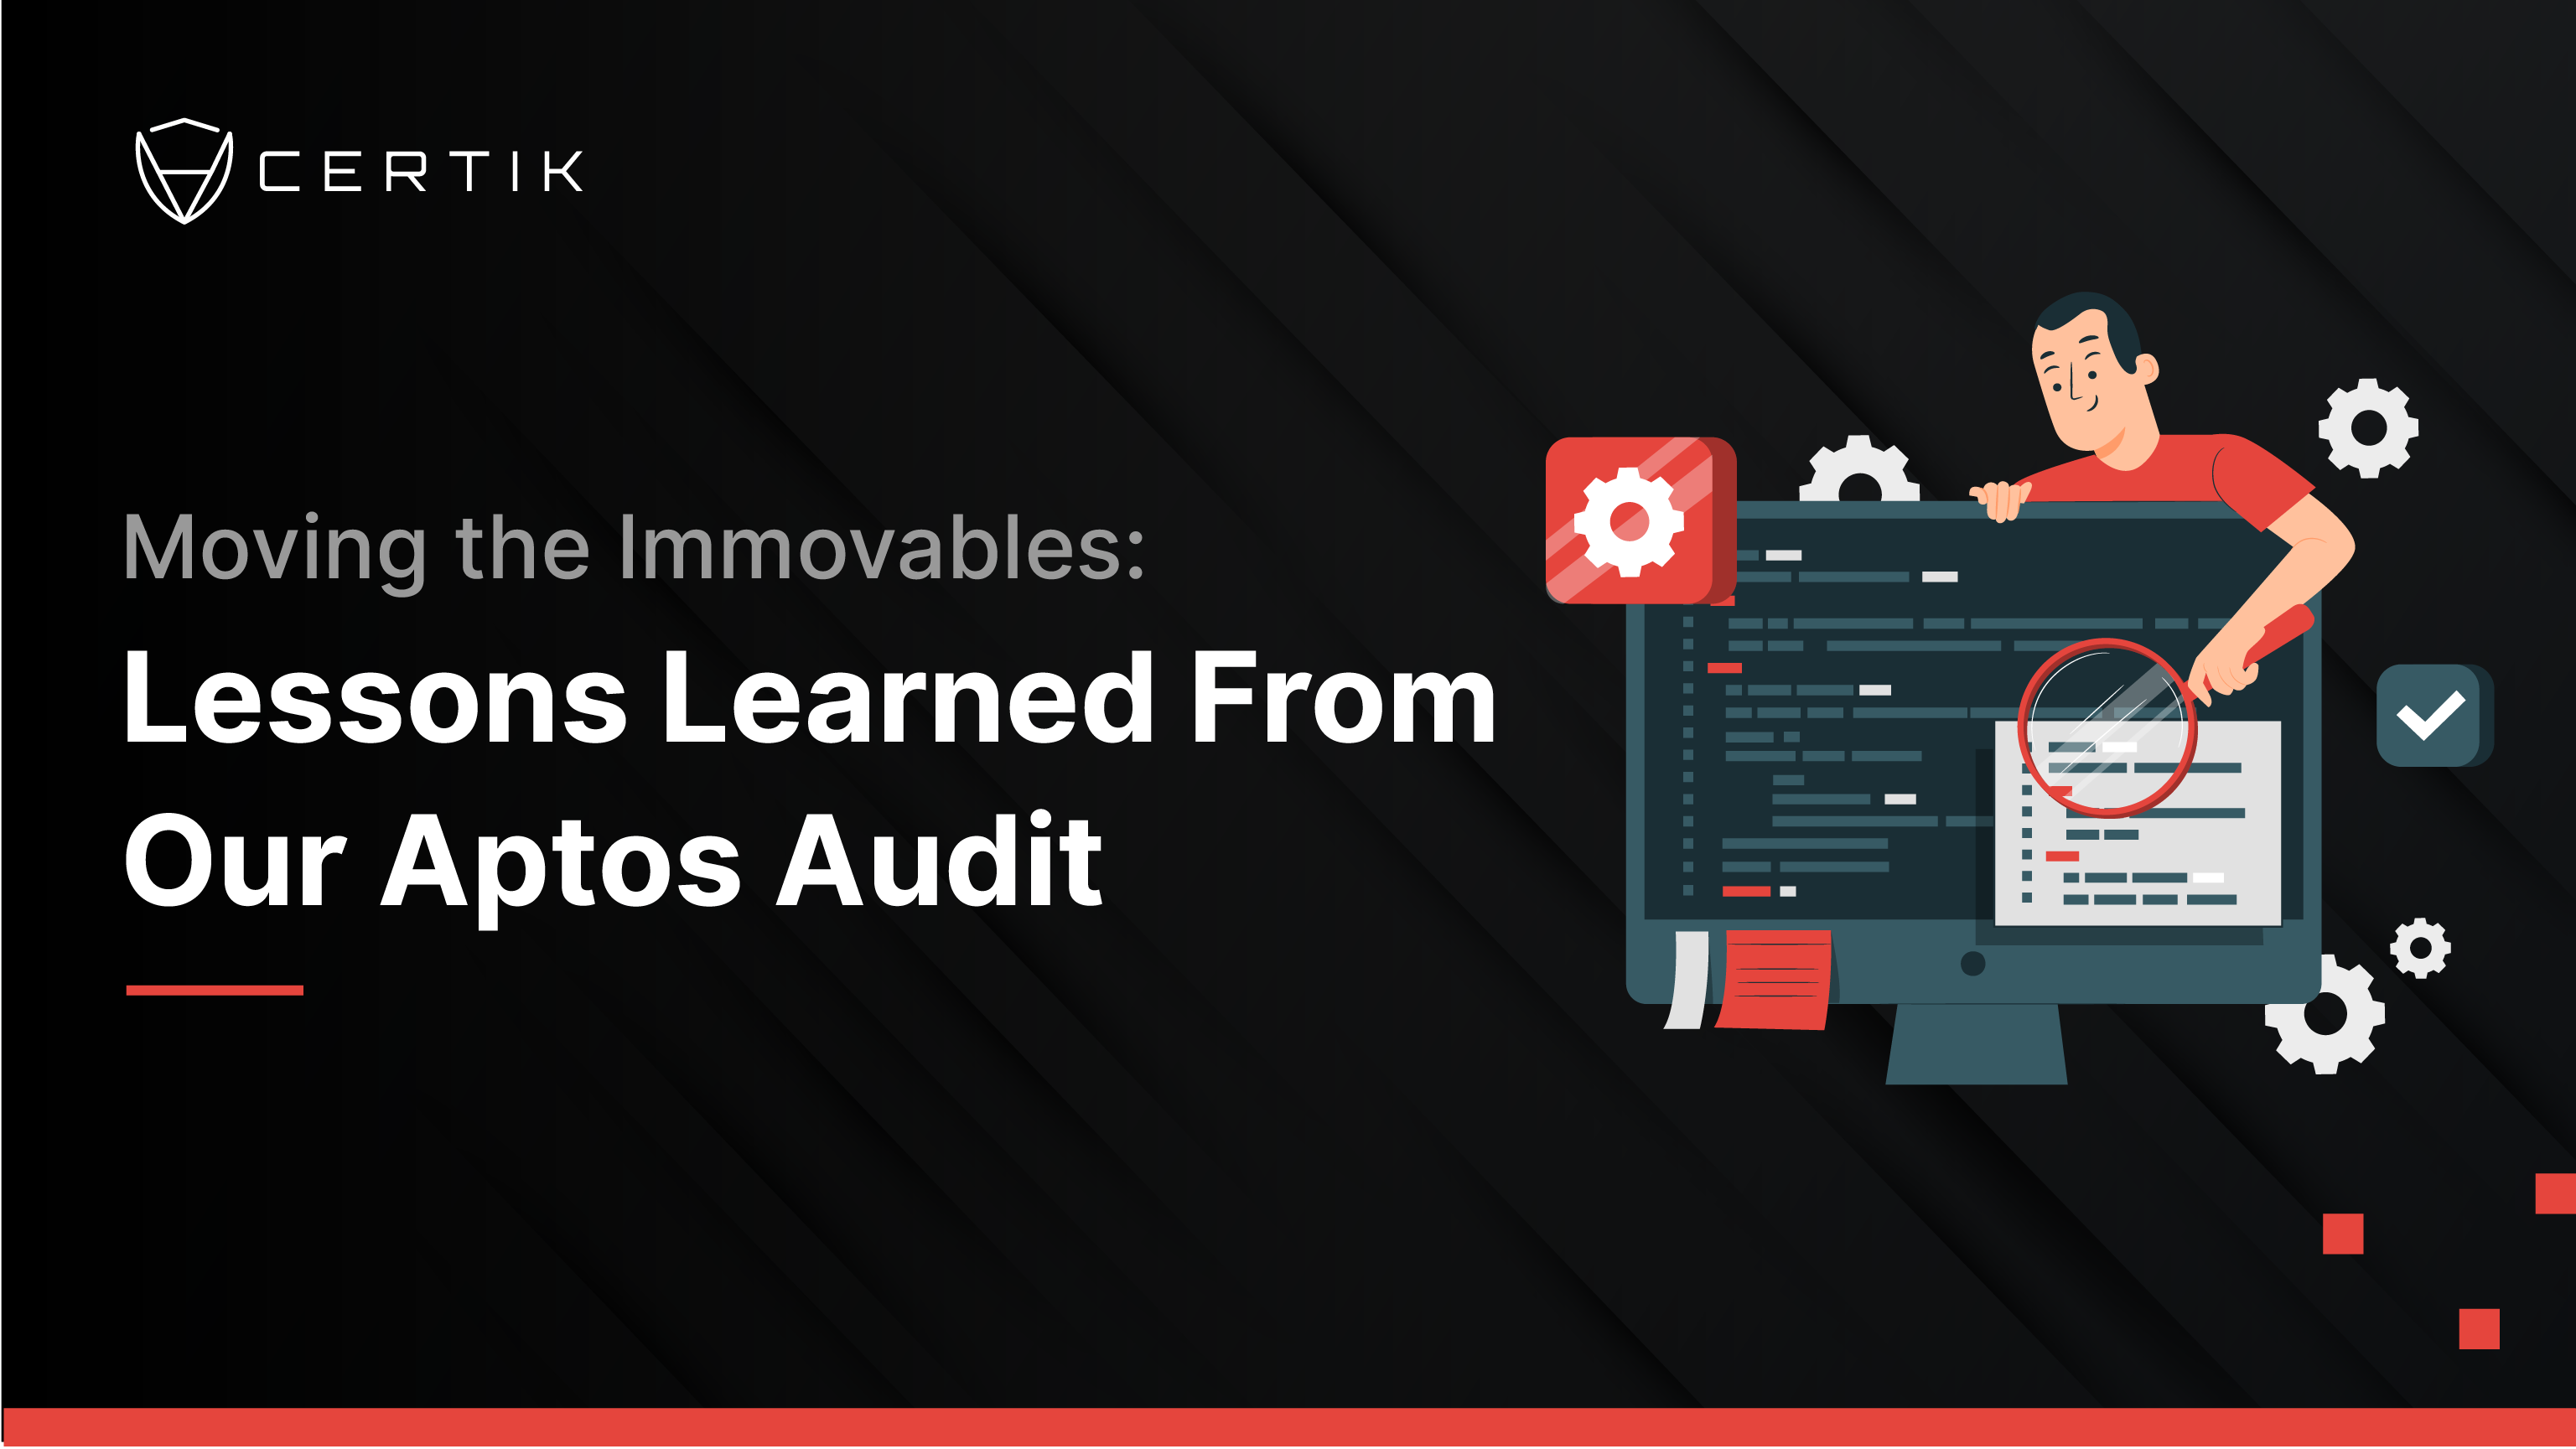 Moving the Immovables: Lessons Learned From Our Aptos Smart Contract Audit